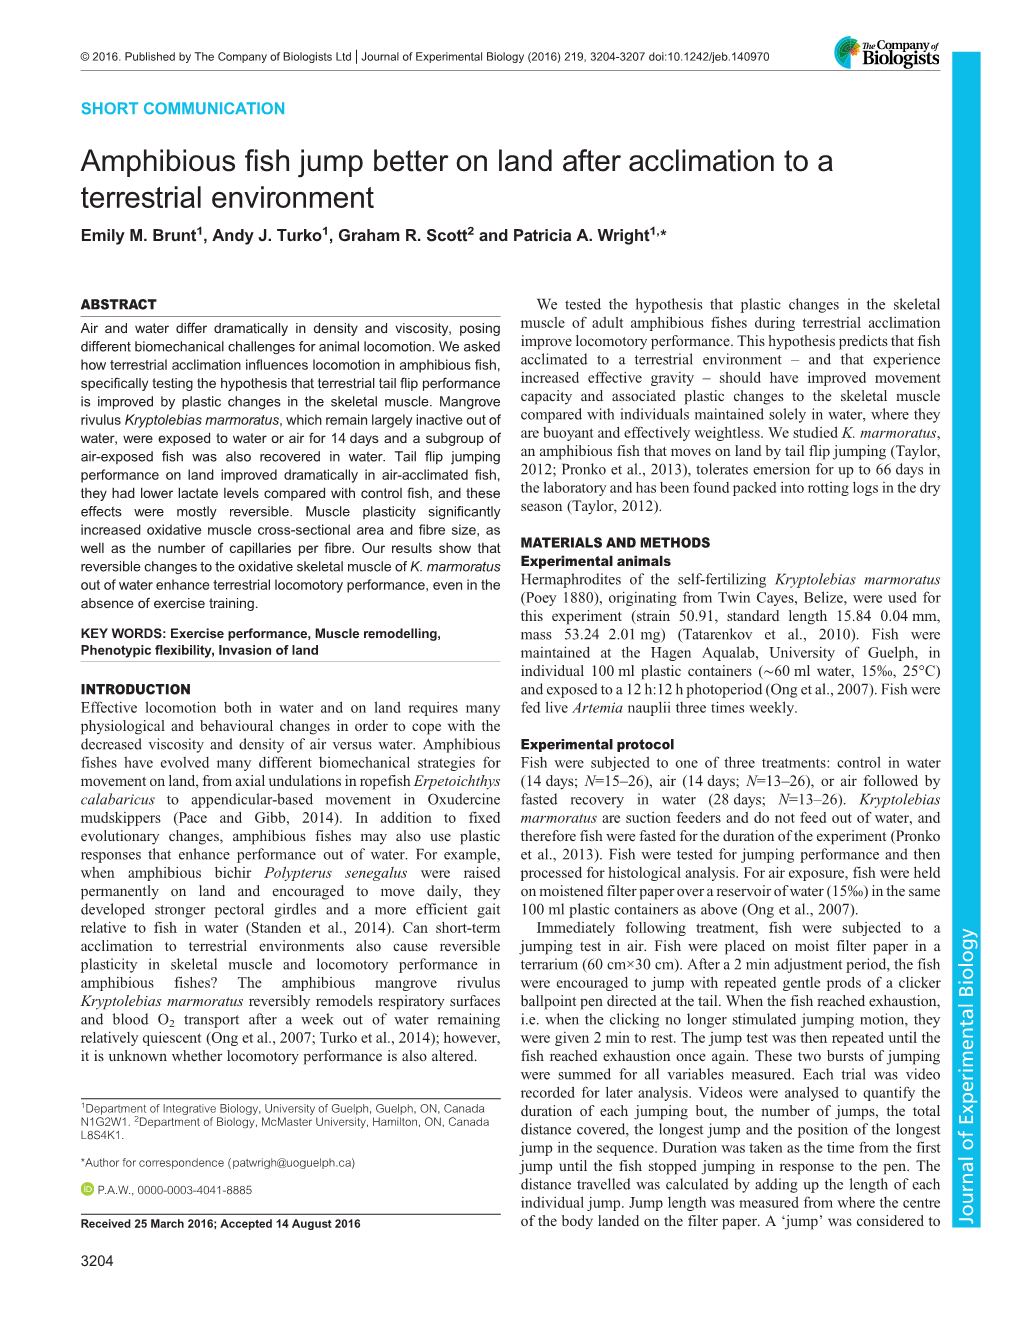 Amphibious Fish Jump Better on Land After Acclimation to a Terrestrial Environment Emily M